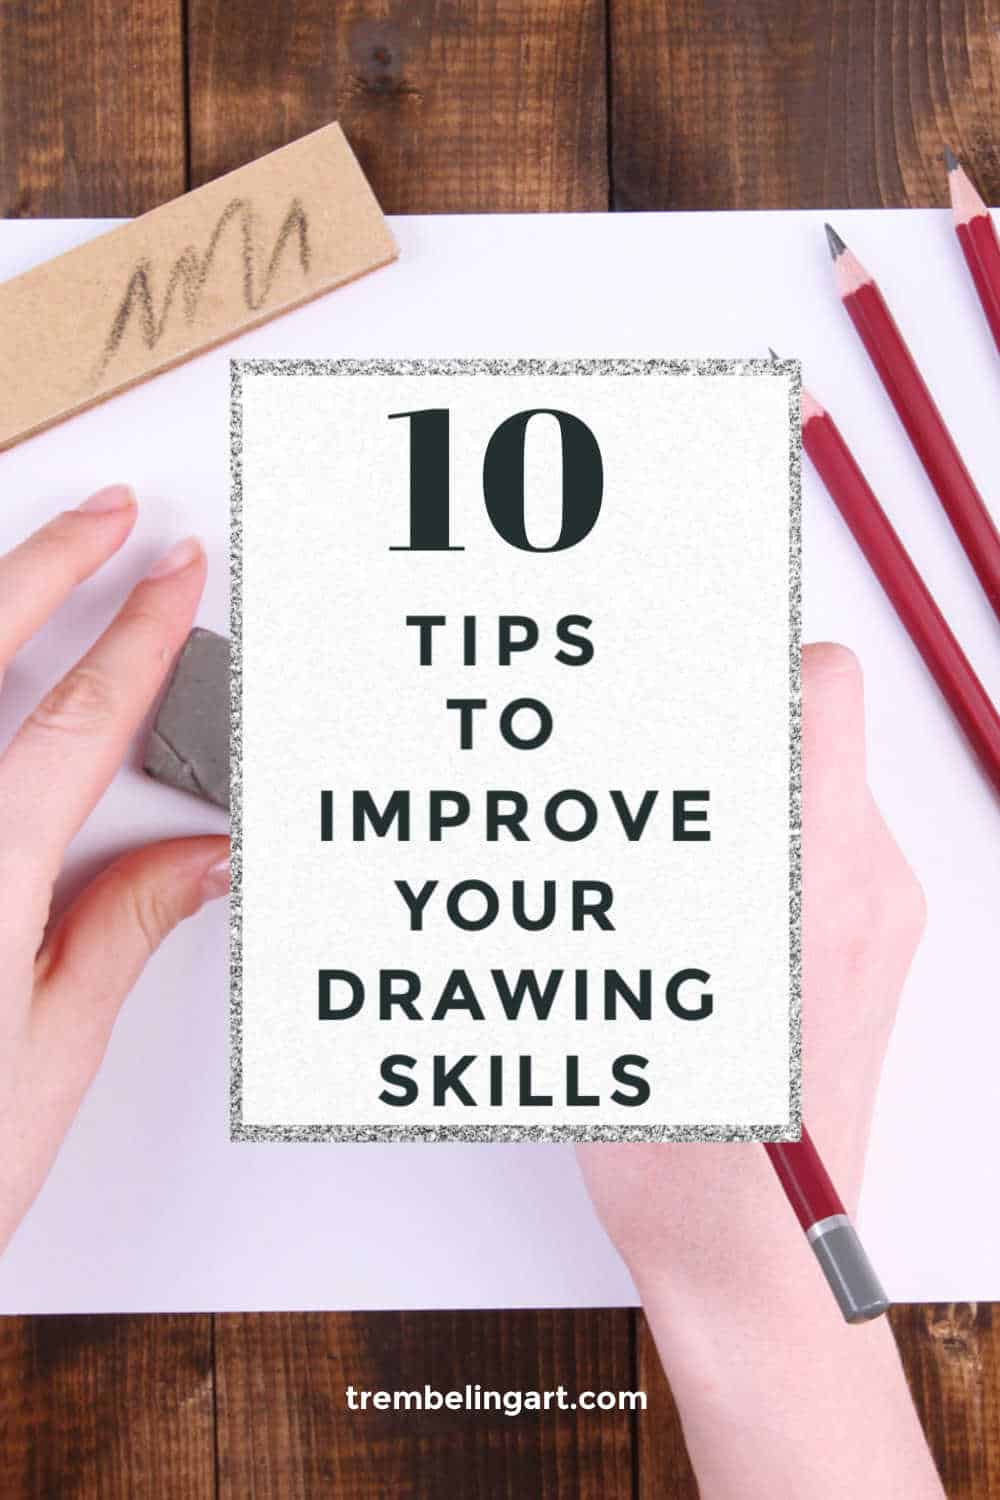 How Can I Improve My Drawing Skills Fast? / 15 Tips To Improve Your